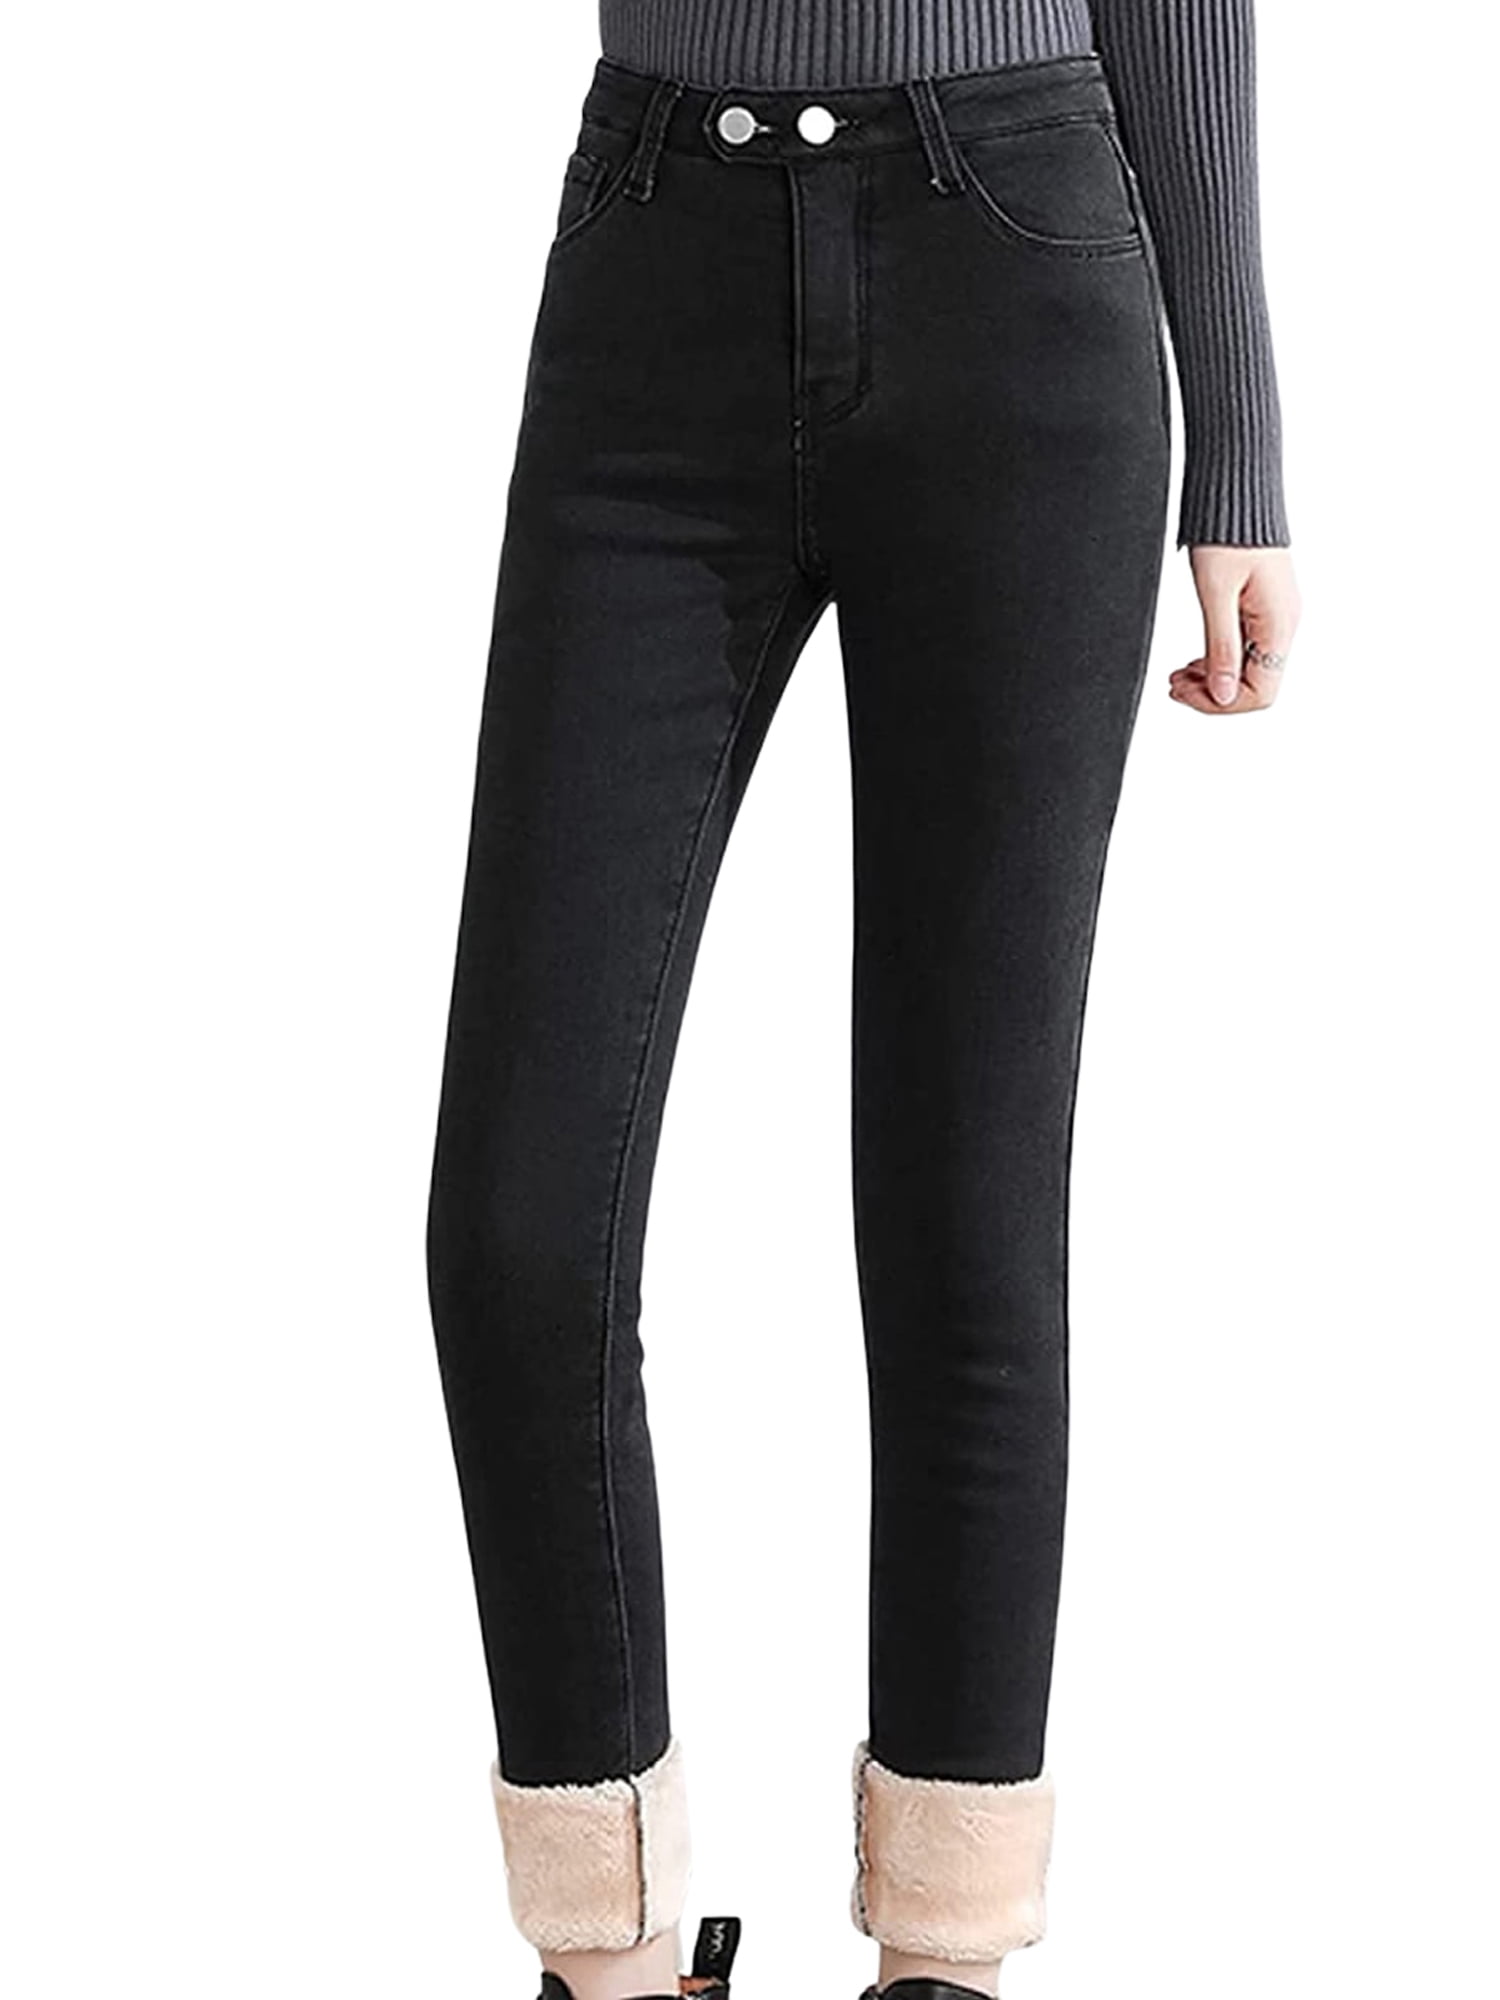 Suanret Women Winter Warm Fleece Lined Thick Jeans Plus Size High Waisted  Stretchy Skinny Thermal Jeggings Denim Pants Black 31